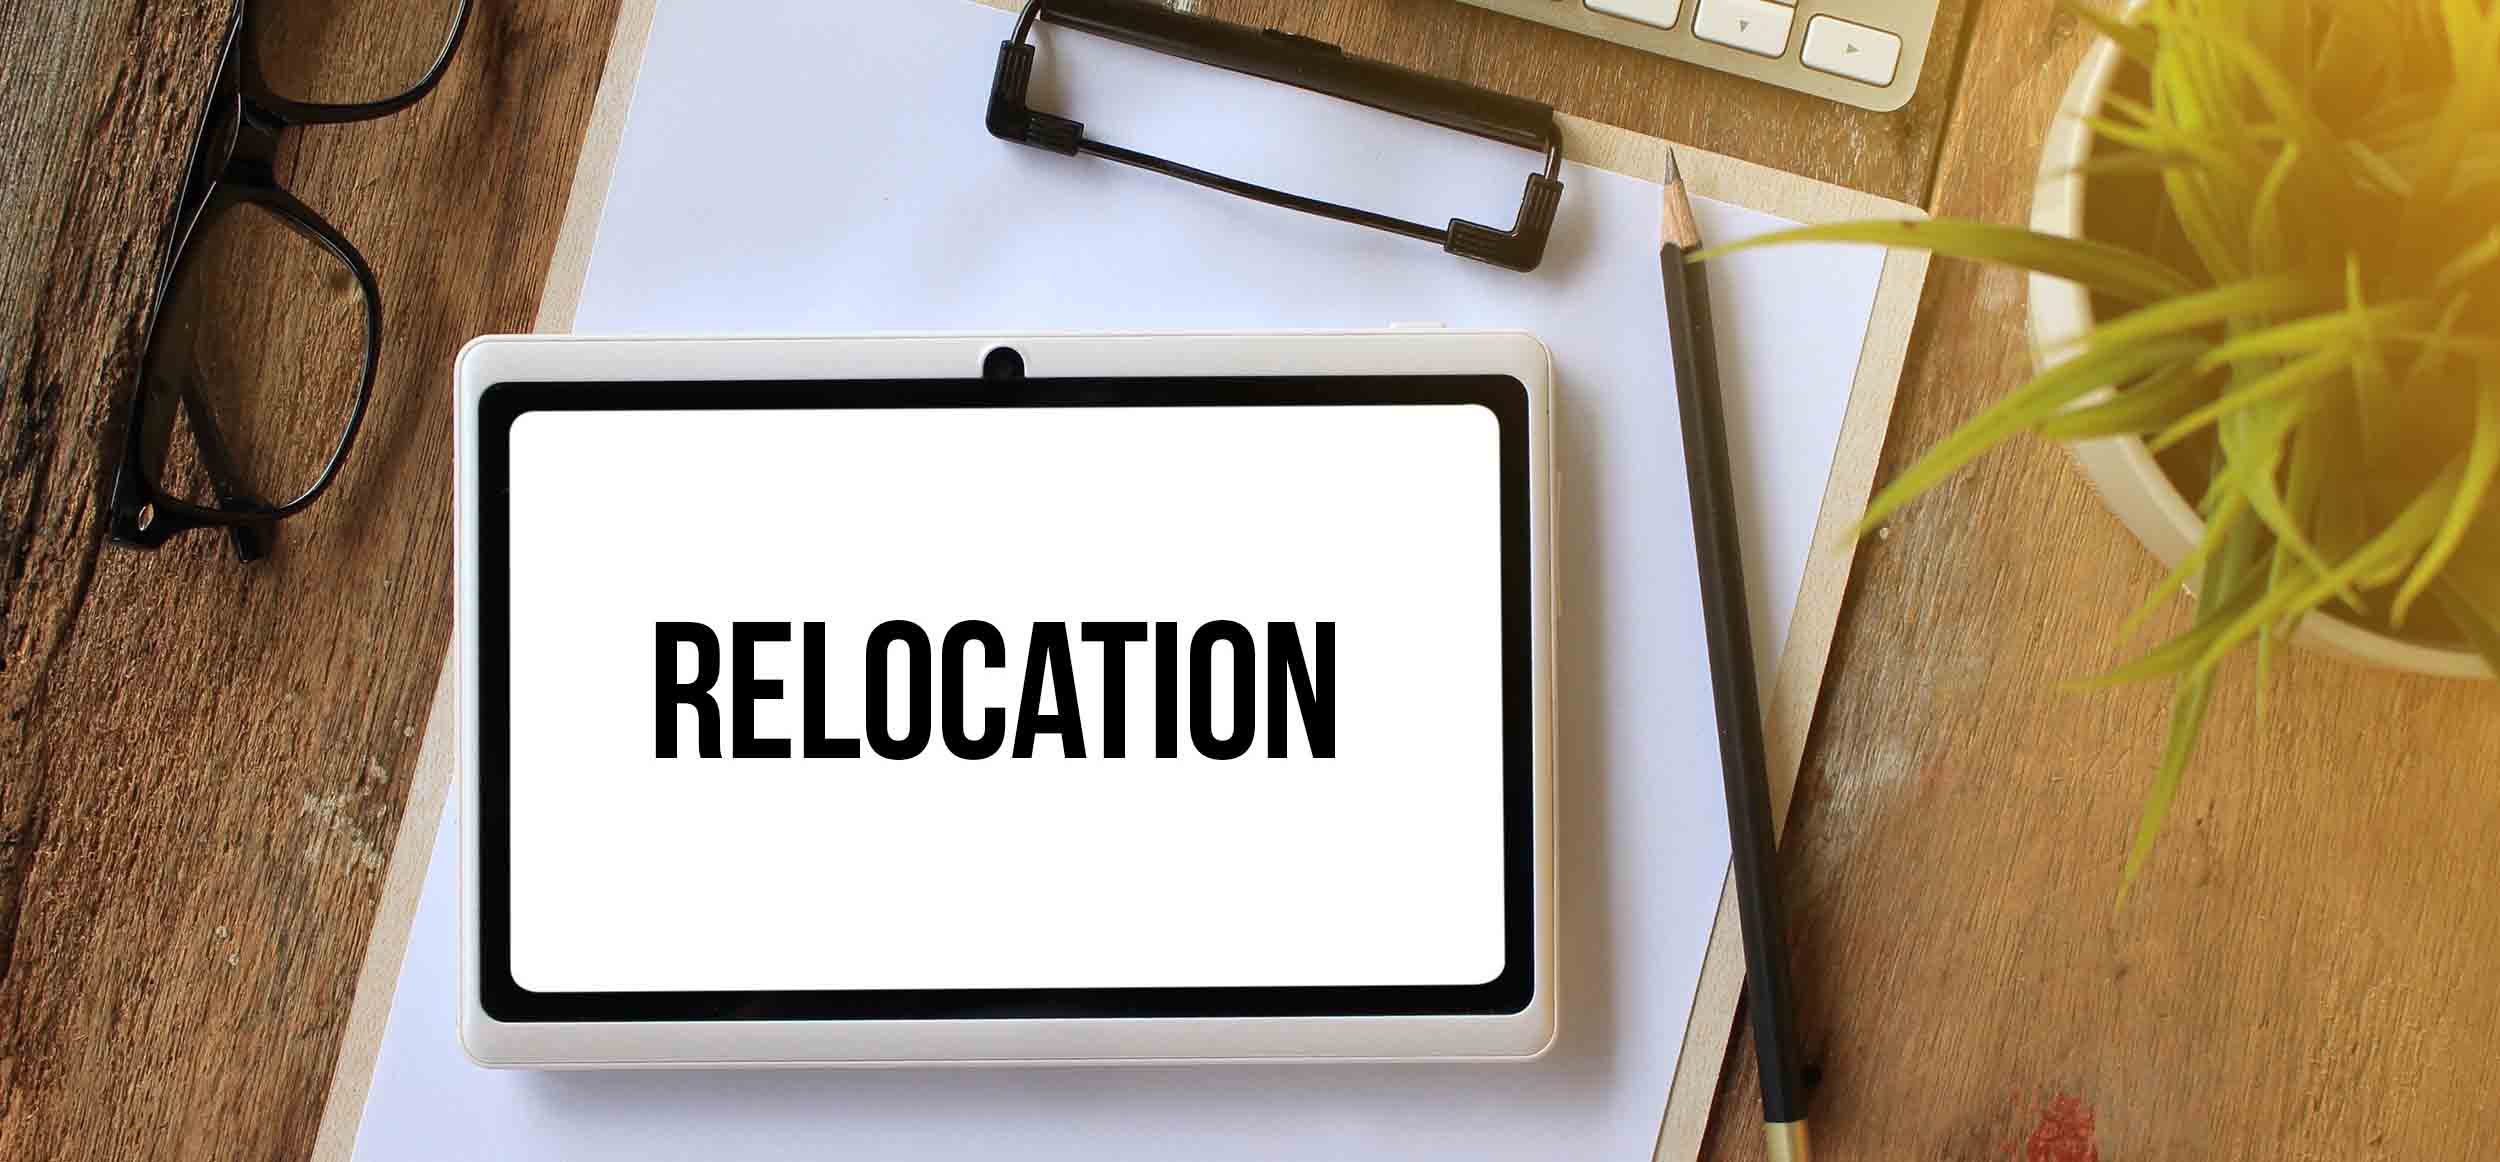 Relocation Services in the Netherlands With De Gruijter